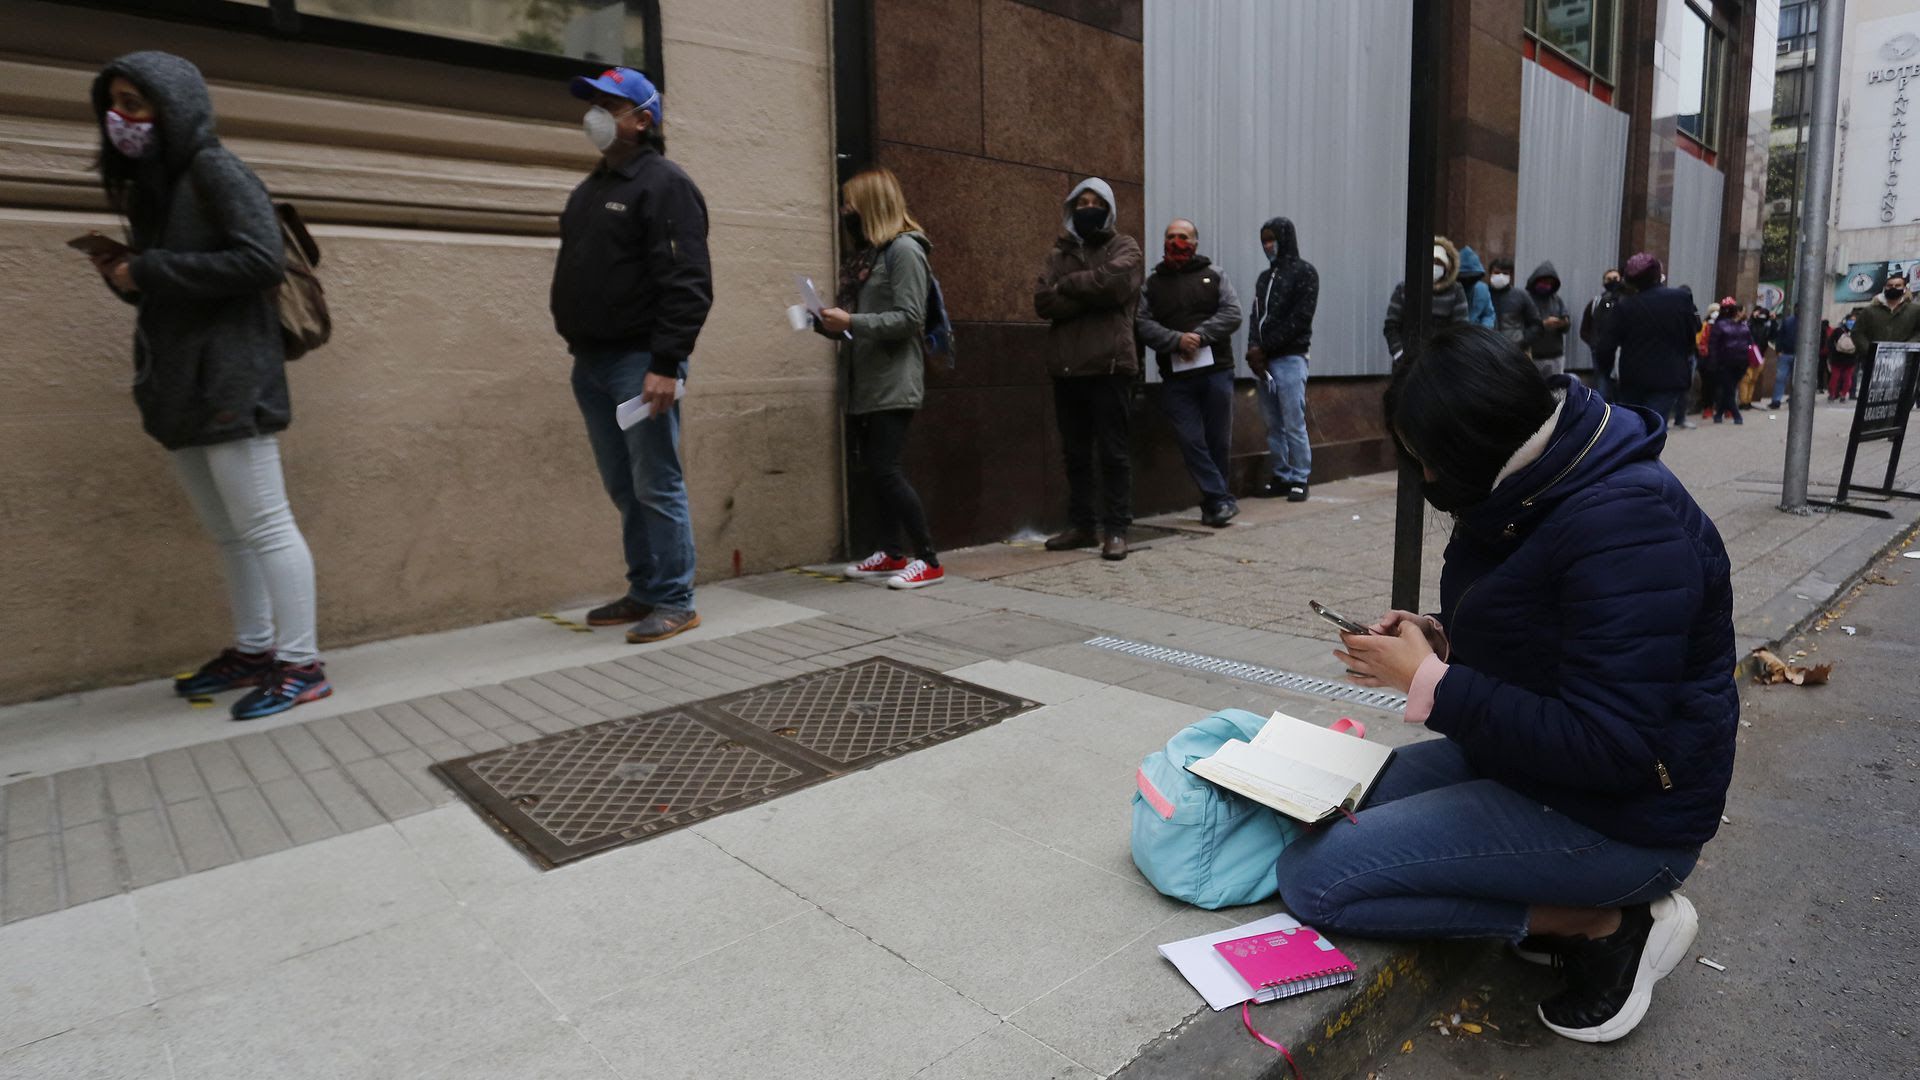 People wait in a long line to file for unemployment